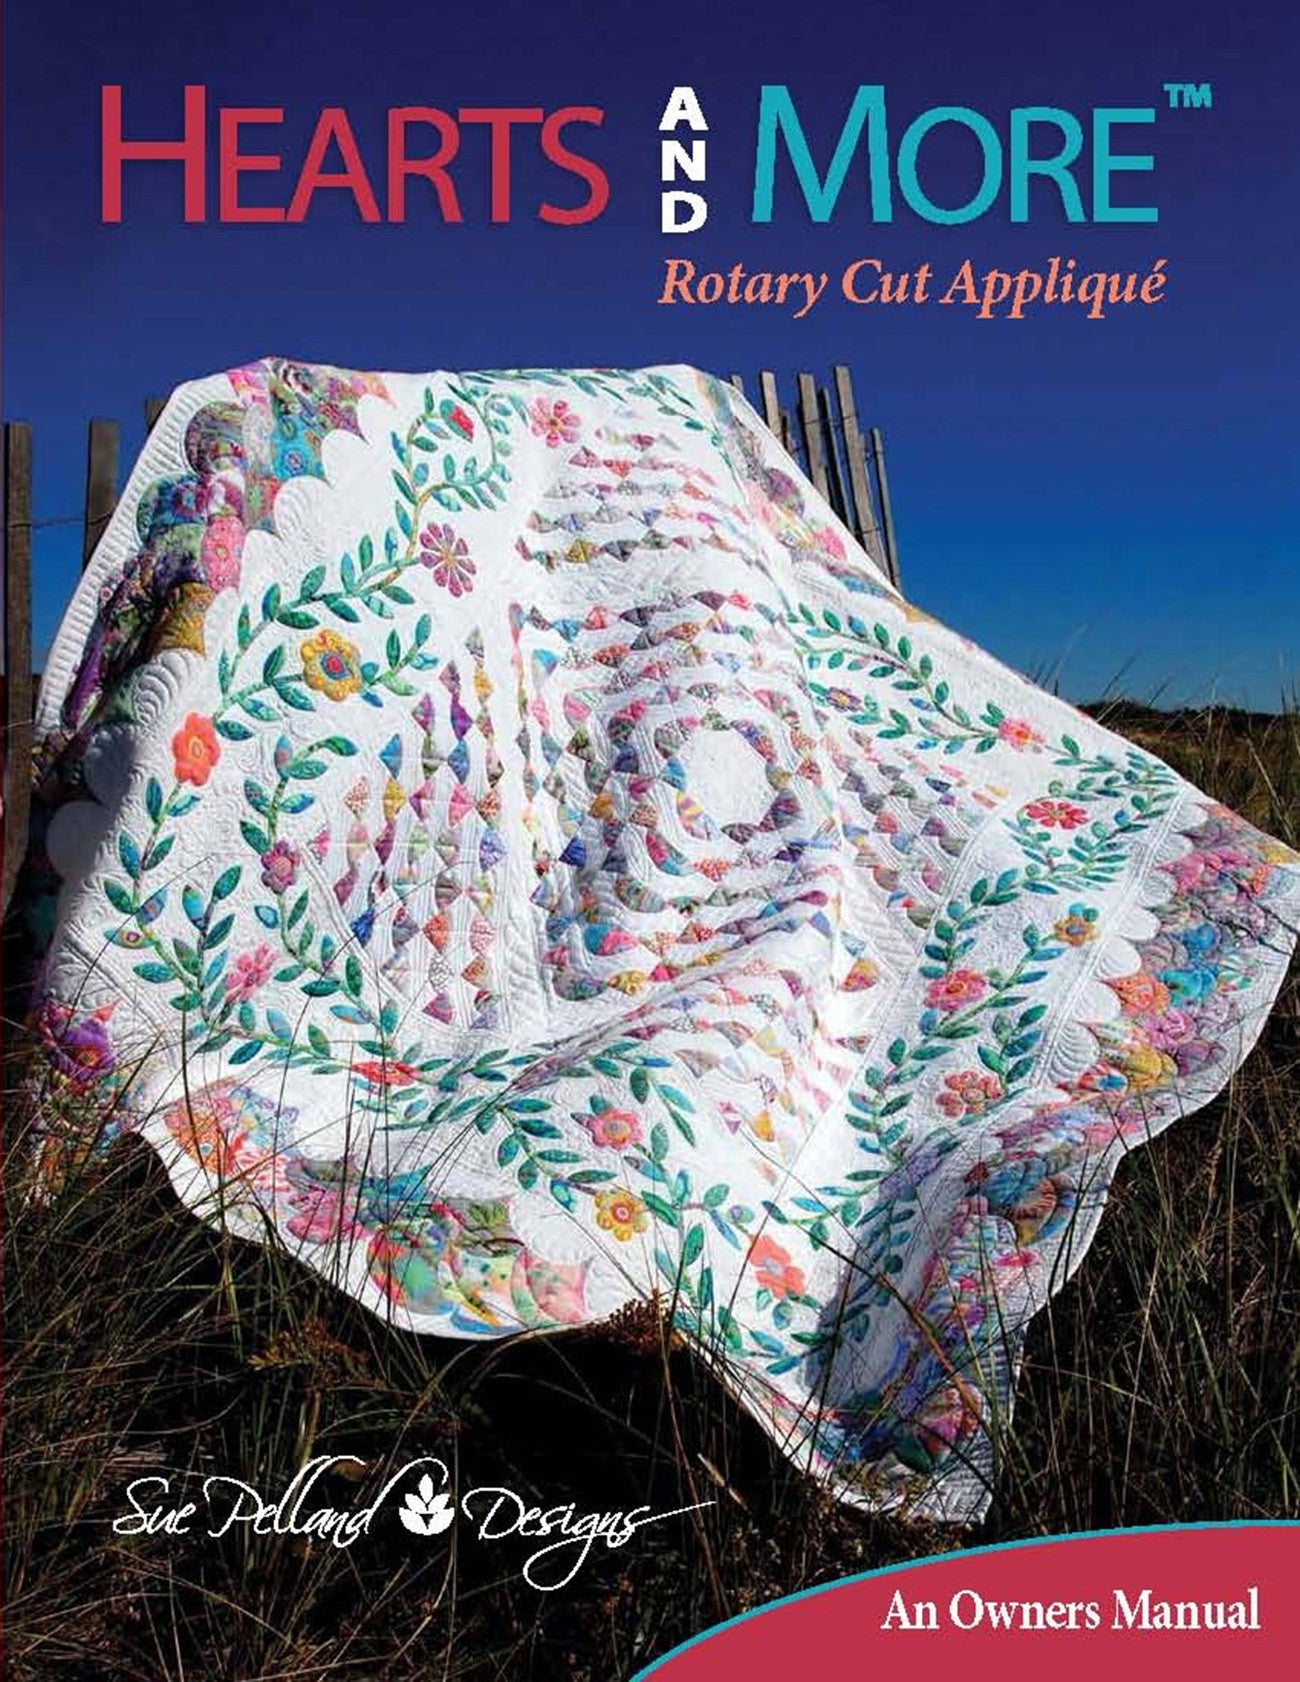 Hearts And More Rotary Cut Applique Quilt Book by Sue Pelland Designs